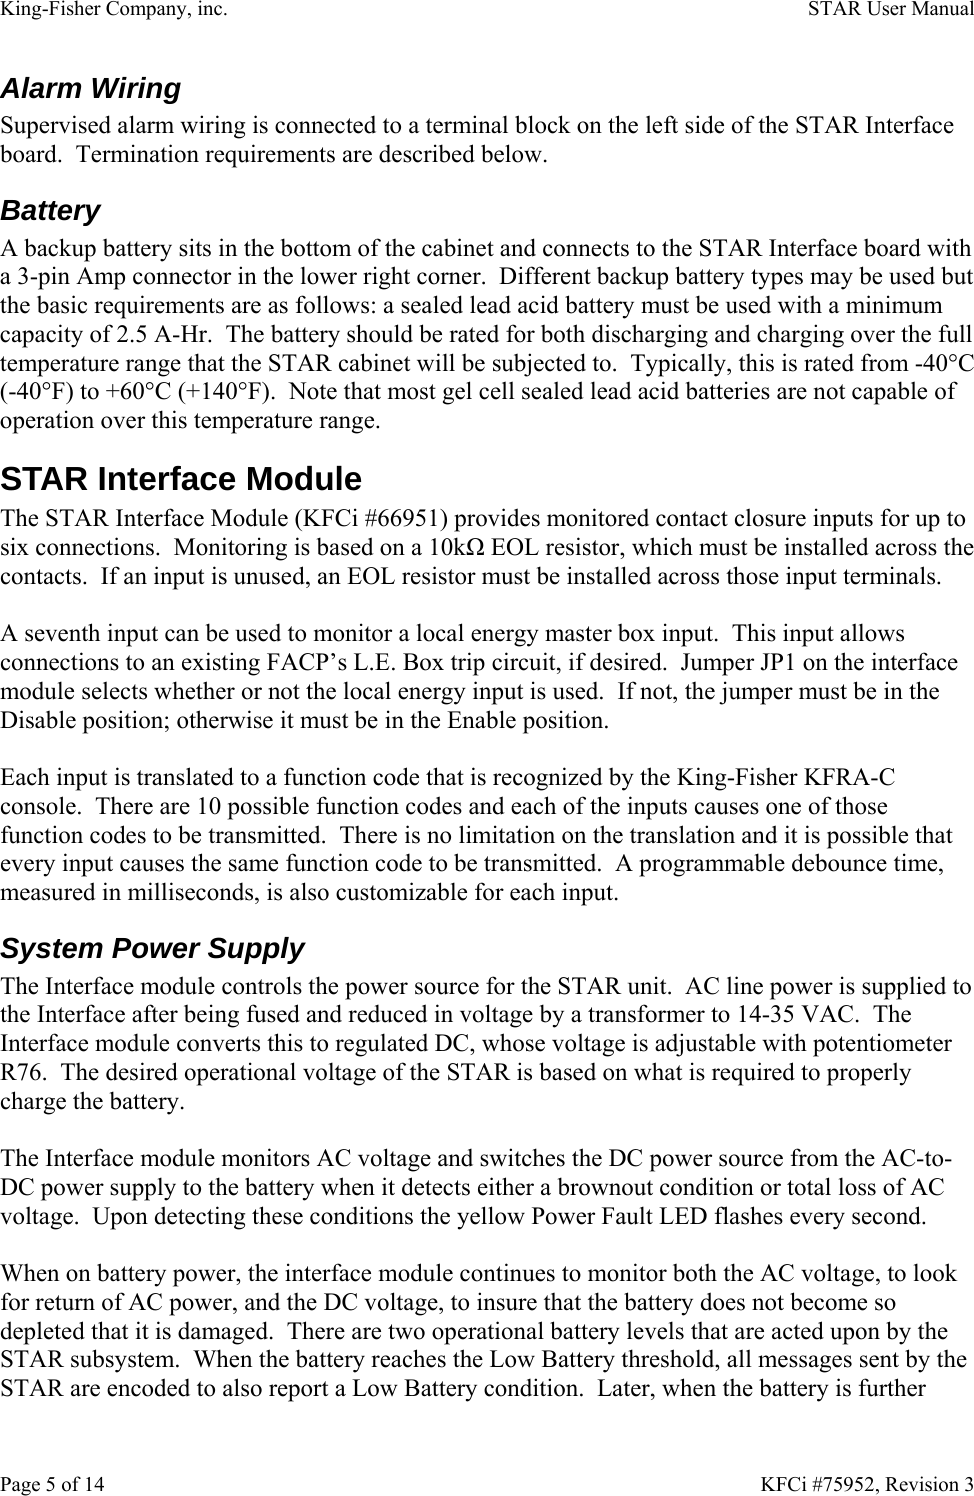 King-Fisher Company, inc.    STAR User Manual Page 5 of 14    KFCi #75952, Revision 3 Alarm Wiring Supervised alarm wiring is connected to a terminal block on the left side of the STAR Interface board.  Termination requirements are described below. Battery A backup battery sits in the bottom of the cabinet and connects to the STAR Interface board with a 3-pin Amp connector in the lower right corner.  Different backup battery types may be used but the basic requirements are as follows: a sealed lead acid battery must be used with a minimum capacity of 2.5 A-Hr.  The battery should be rated for both discharging and charging over the full temperature range that the STAR cabinet will be subjected to.  Typically, this is rated from -40°C (-40°F) to +60°C (+140°F).  Note that most gel cell sealed lead acid batteries are not capable of operation over this temperature range. STAR Interface Module The STAR Interface Module (KFCi #66951) provides monitored contact closure inputs for up to six connections.  Monitoring is based on a 10kΩ EOL resistor, which must be installed across the contacts.  If an input is unused, an EOL resistor must be installed across those input terminals.  A seventh input can be used to monitor a local energy master box input.  This input allows connections to an existing FACP’s L.E. Box trip circuit, if desired.  Jumper JP1 on the interface module selects whether or not the local energy input is used.  If not, the jumper must be in the Disable position; otherwise it must be in the Enable position.  Each input is translated to a function code that is recognized by the King-Fisher KFRA-C console.  There are 10 possible function codes and each of the inputs causes one of those function codes to be transmitted.  There is no limitation on the translation and it is possible that every input causes the same function code to be transmitted.  A programmable debounce time, measured in milliseconds, is also customizable for each input. System Power Supply The Interface module controls the power source for the STAR unit.  AC line power is supplied to the Interface after being fused and reduced in voltage by a transformer to 14-35 VAC.  The Interface module converts this to regulated DC, whose voltage is adjustable with potentiometer R76.  The desired operational voltage of the STAR is based on what is required to properly charge the battery.  The Interface module monitors AC voltage and switches the DC power source from the AC-to-DC power supply to the battery when it detects either a brownout condition or total loss of AC voltage.  Upon detecting these conditions the yellow Power Fault LED flashes every second.  When on battery power, the interface module continues to monitor both the AC voltage, to look for return of AC power, and the DC voltage, to insure that the battery does not become so depleted that it is damaged.  There are two operational battery levels that are acted upon by the STAR subsystem.  When the battery reaches the Low Battery threshold, all messages sent by the STAR are encoded to also report a Low Battery condition.  Later, when the battery is further 